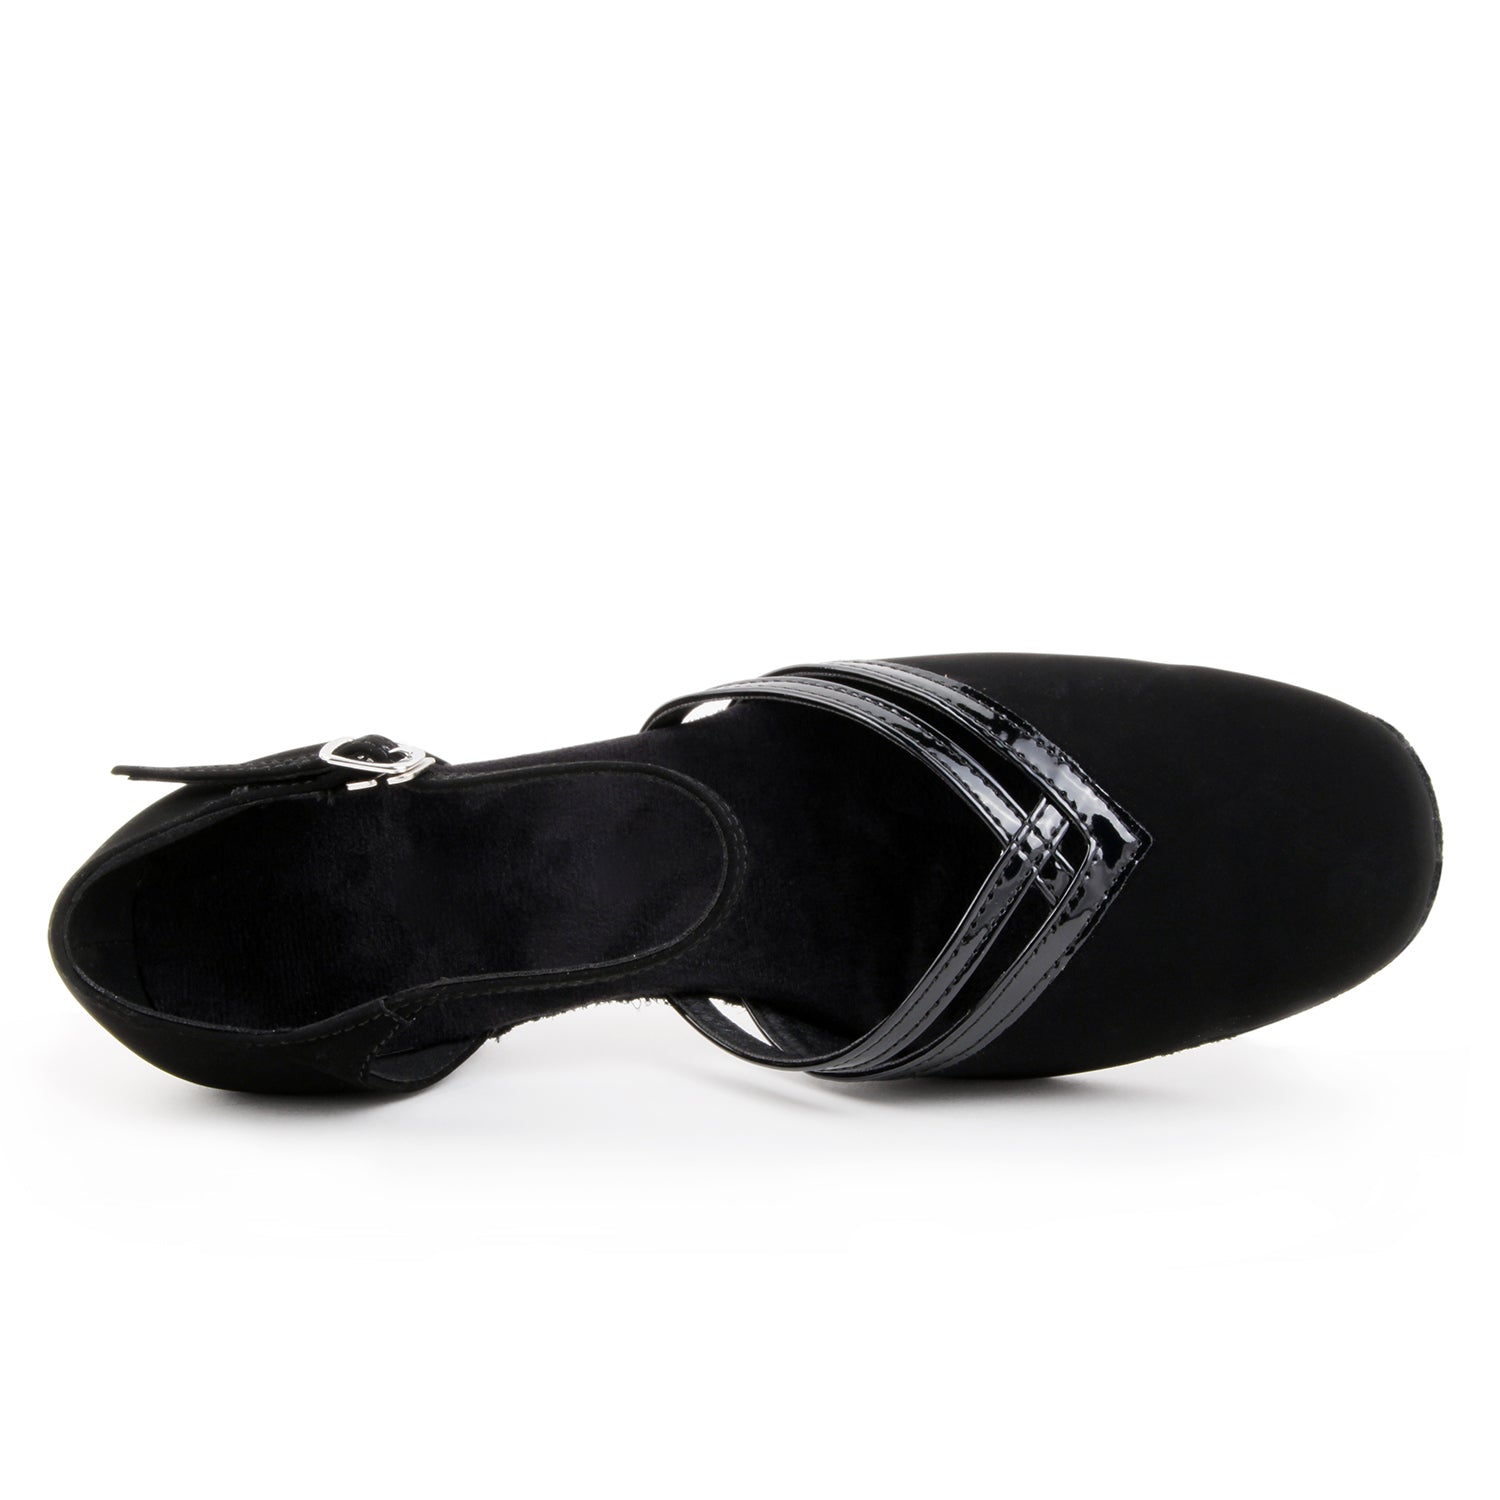 Women Ballroom Dancing Shoes with Suede Sole and Buckle-up Closed-toe in Black for Tango Latin Practice (PD8881A)6